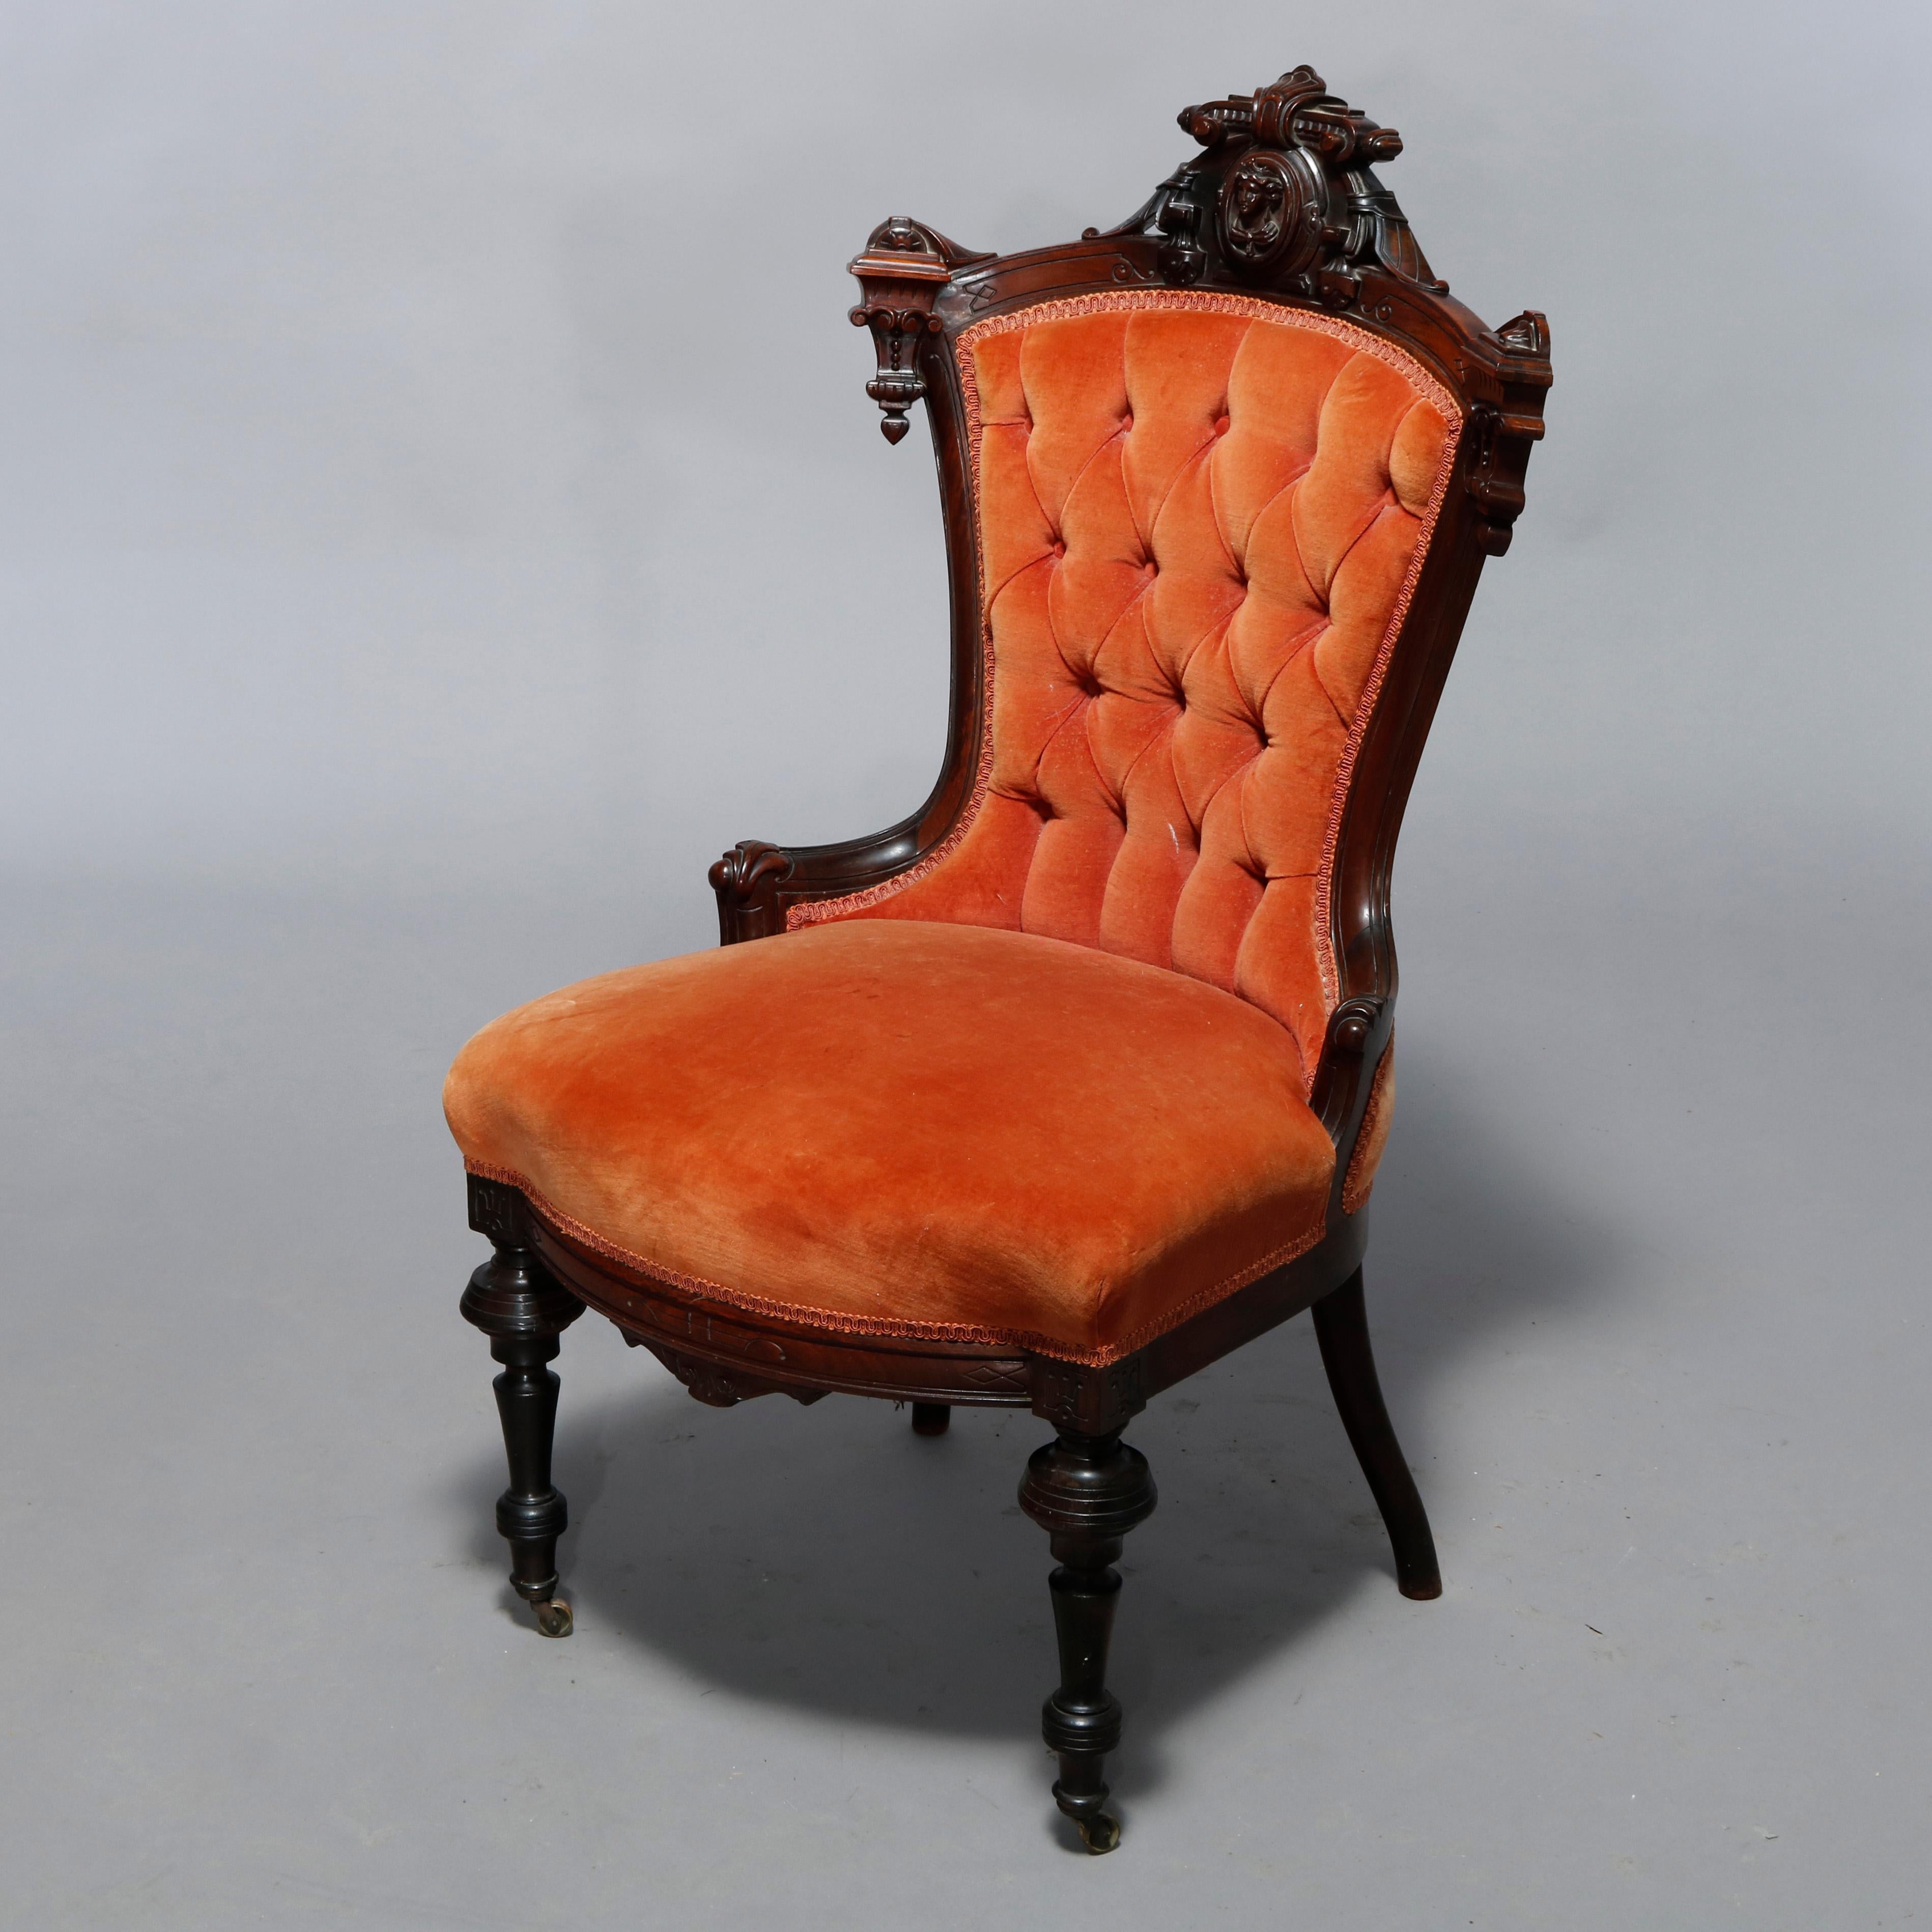 An antique pair Renaissance Revival figural boudoir chairs by Jelliff offer rosewood construction with carved rail having central mask with flanking drop finials, button back and upholstered seat raised on turned legs, 19th century

Measures: peach